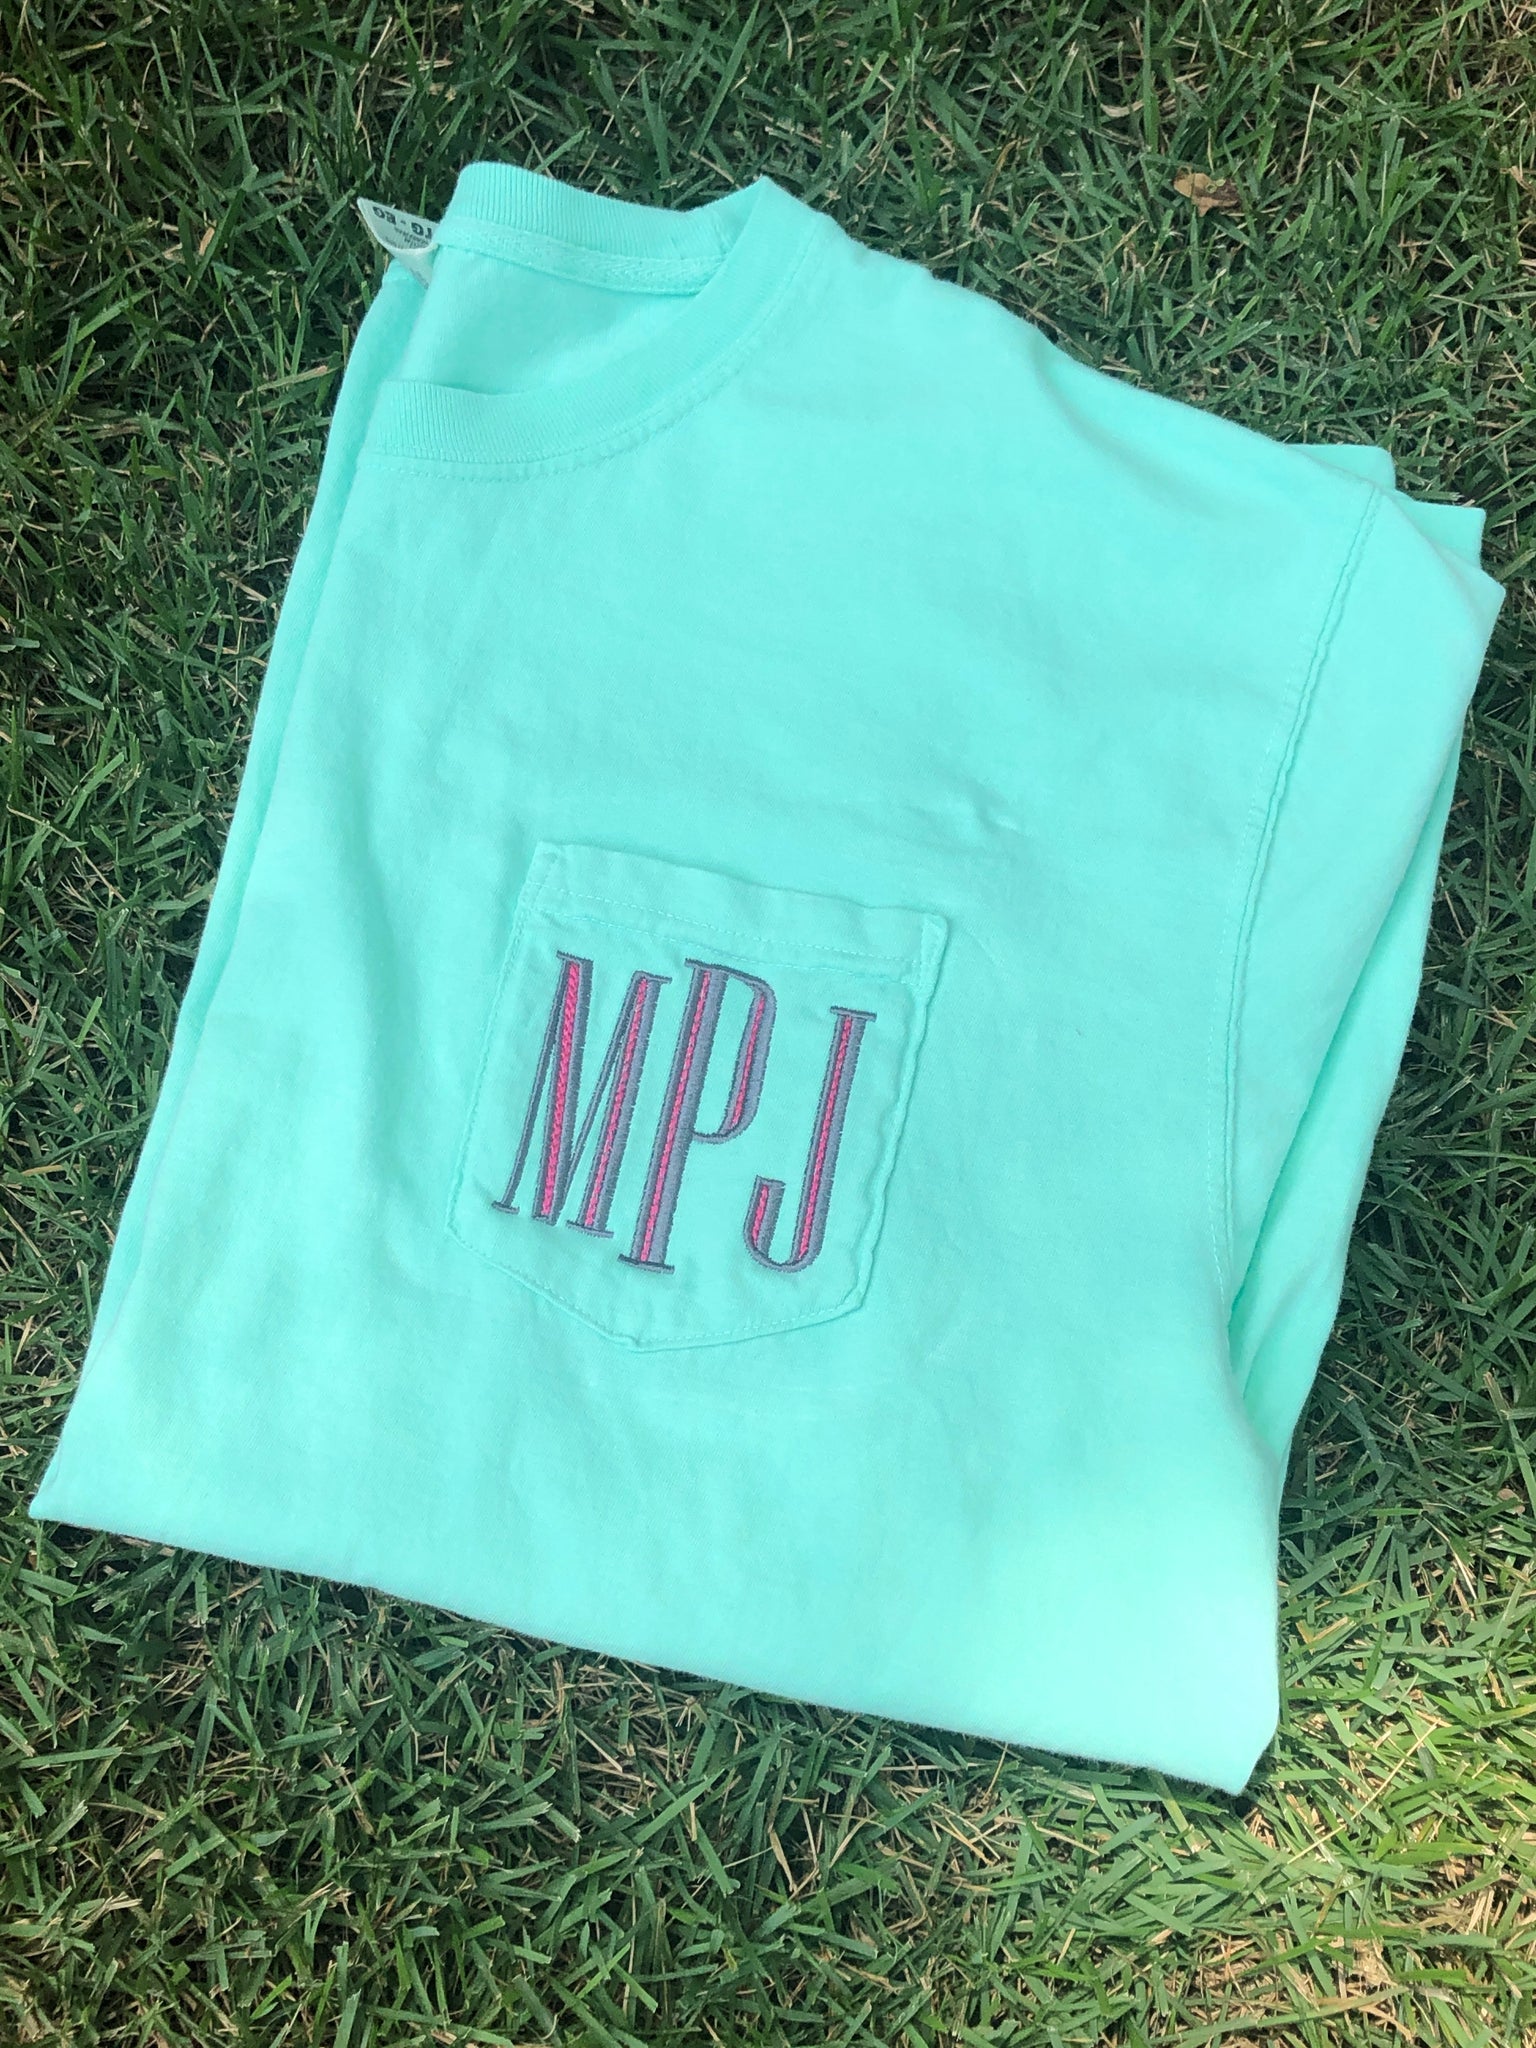 MYSTERY COLOR FILLED "WHIT" FONT POCKET TEES